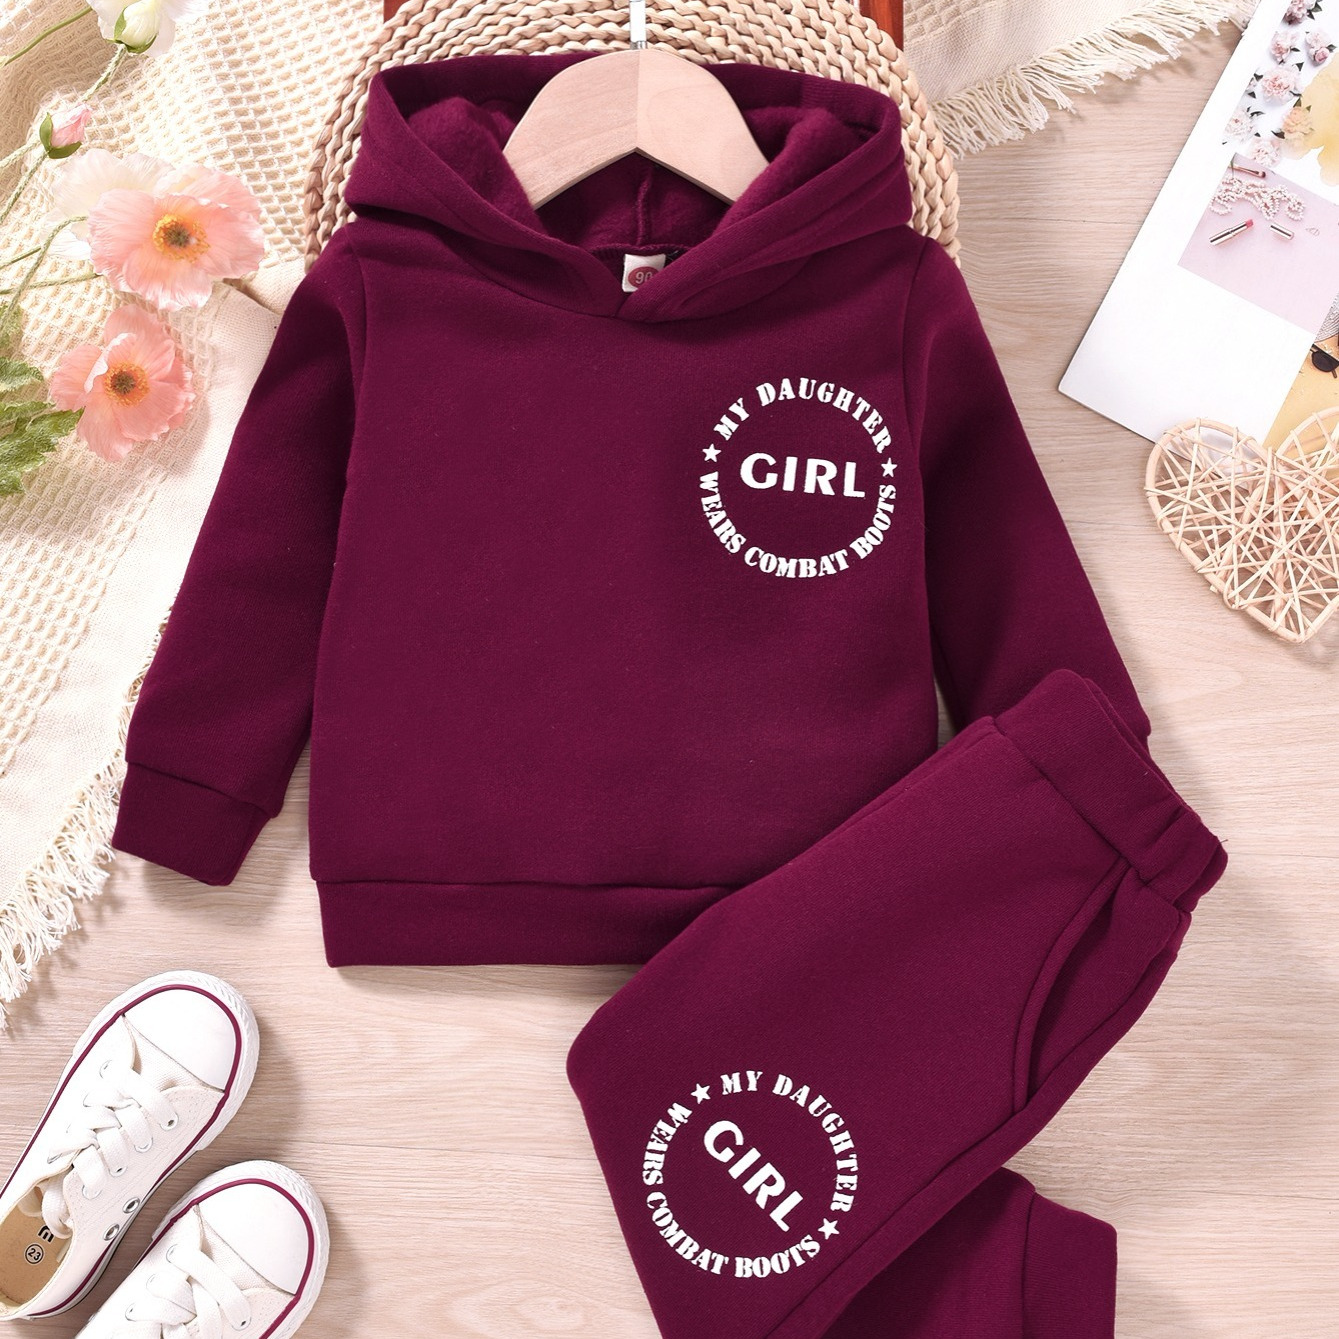 

Girls "my Daughter Wears Combat Boots" Sweatsuit, Casual Hoodies & Matching Sweatpants Fall Winter Outfits Kids Clothes